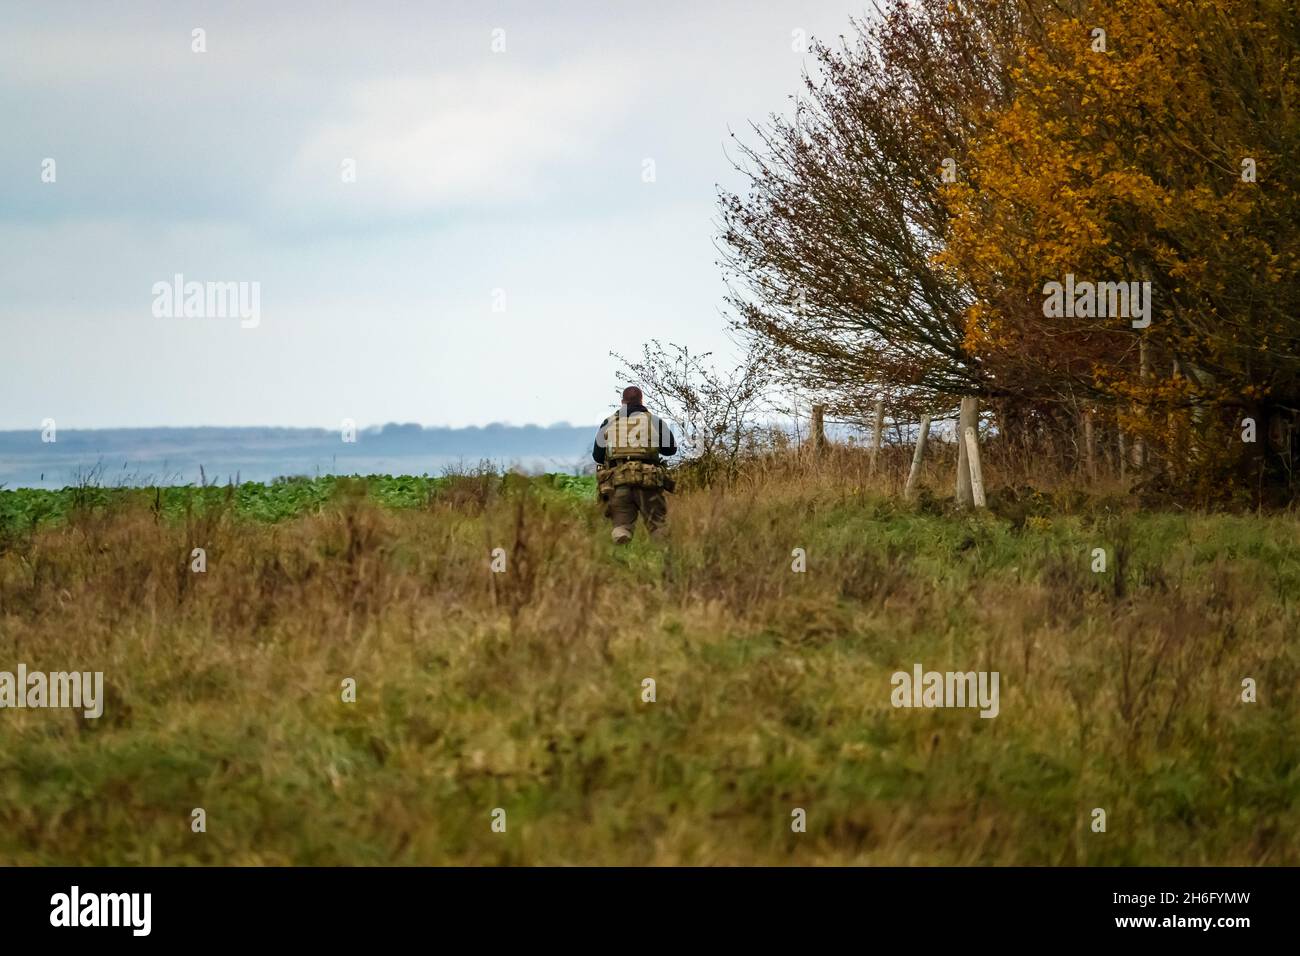 British army special forces soldier with SA80 L85 rifle at the ready runs towards enemy located in woodland, on a military exercise, Wiltshire UK Stock Photo